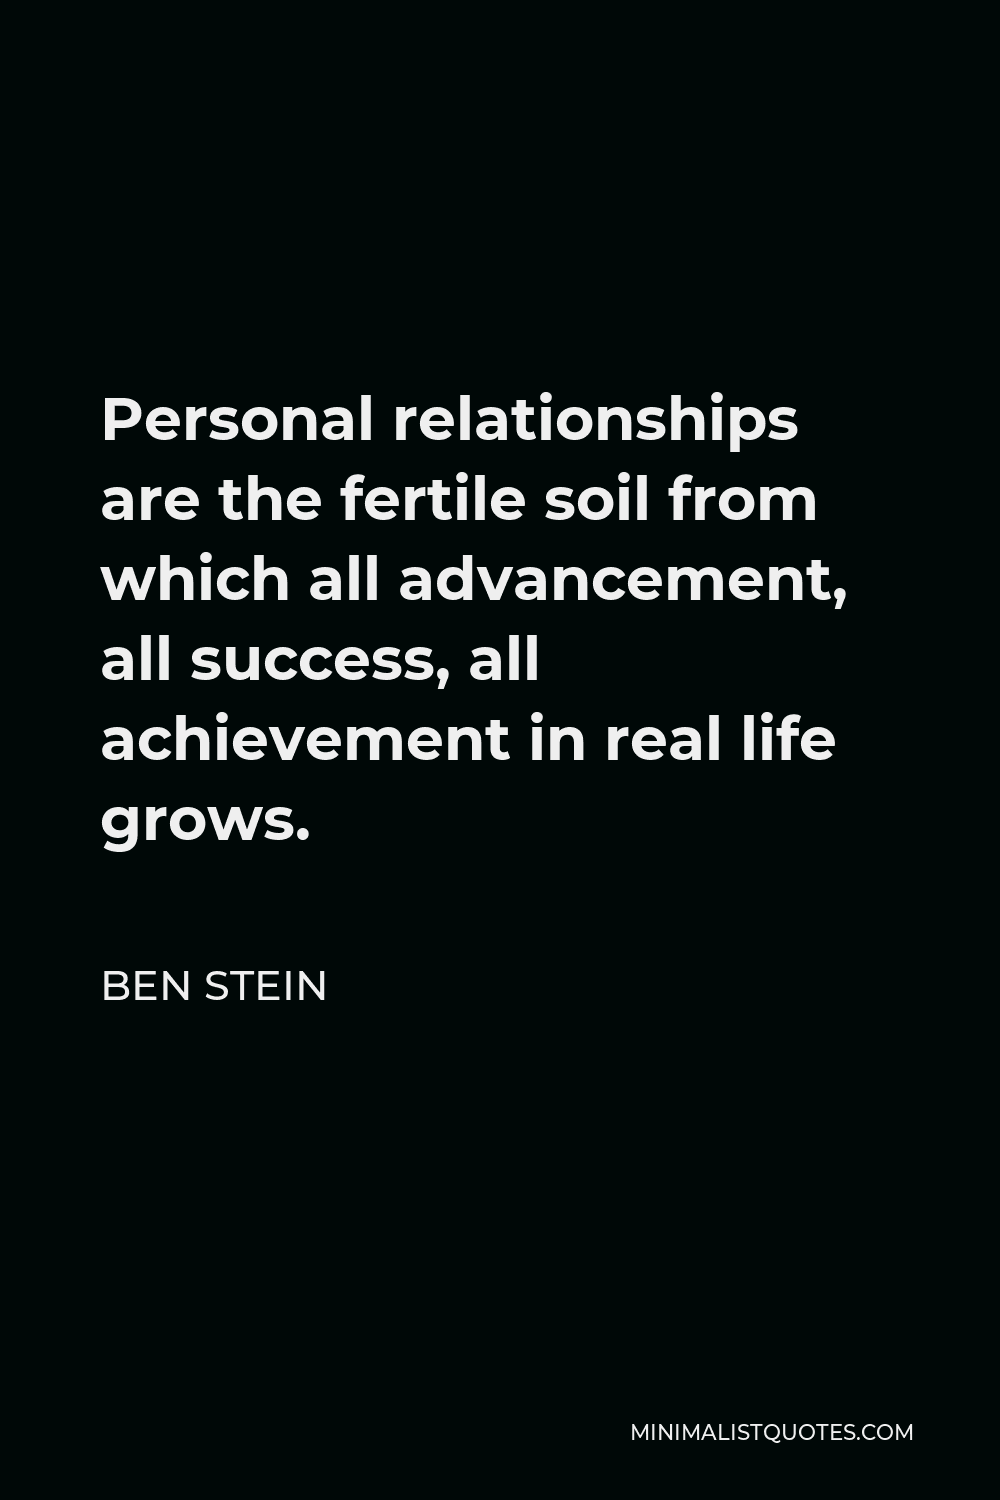 Ben Stein Quote - Personal relationships are the fertile soil from which all advancement, all success, all achievement in real life grows.